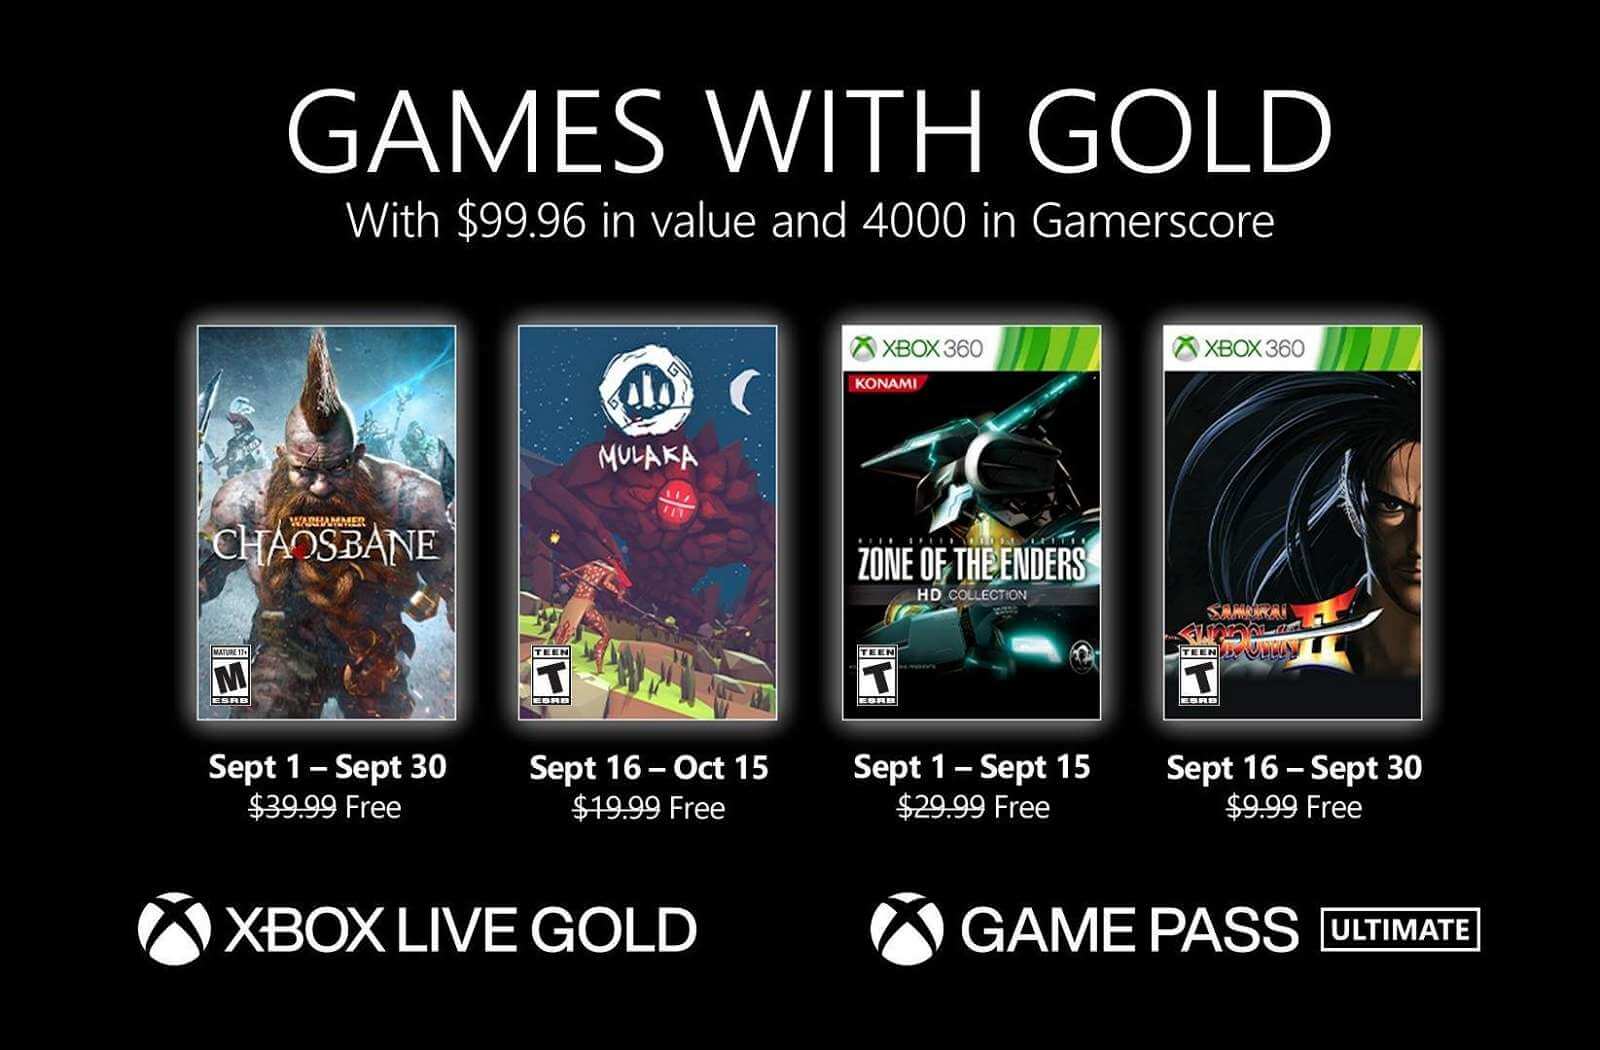 Xbox Game Pass Ultimate gets free xCloud game streaming in September